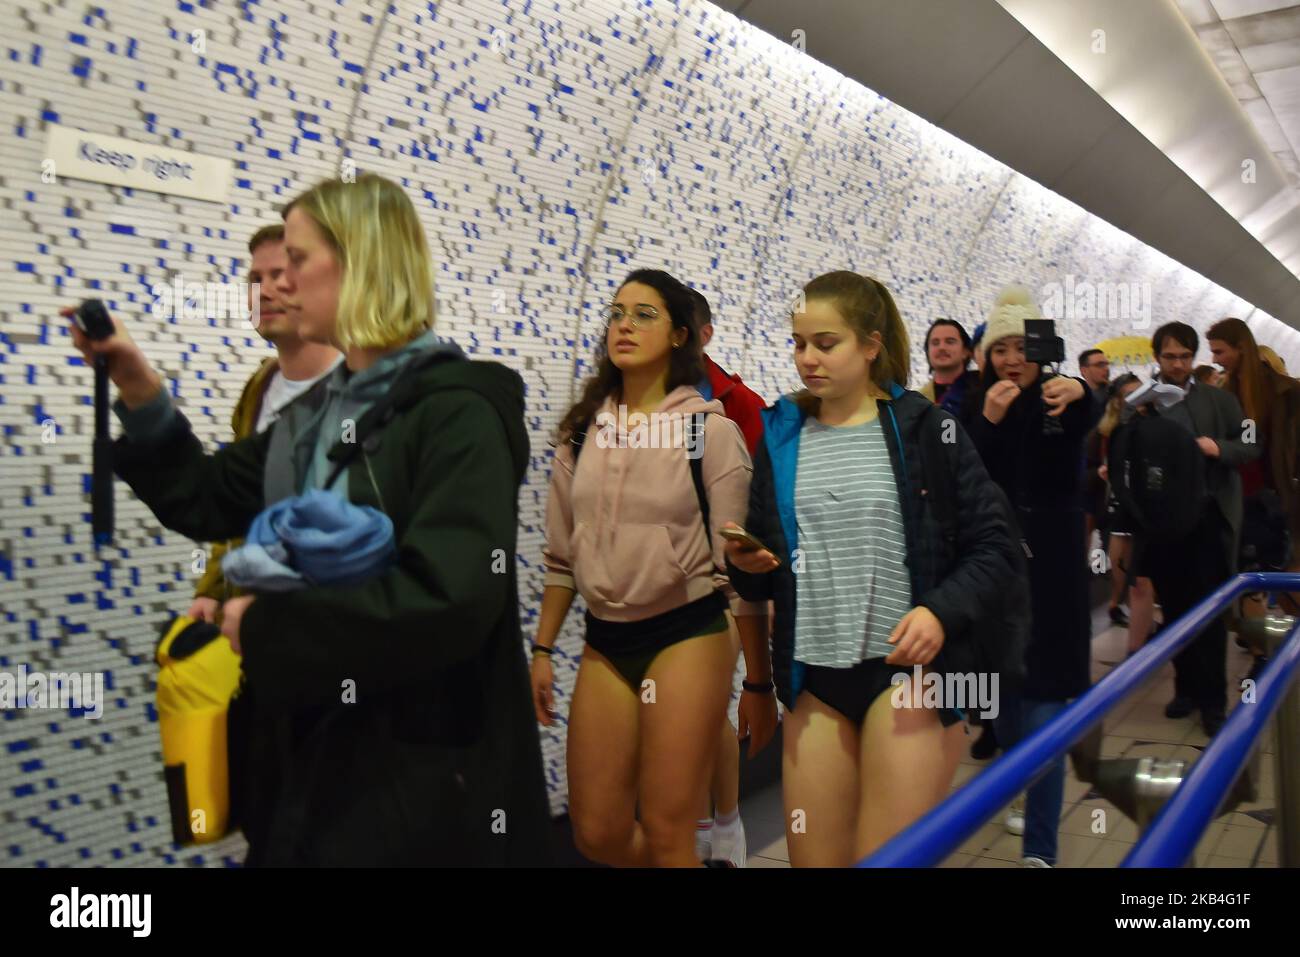 TIMES NOW - Hundreds of Londoners stripped down to their underwear for the  12th annual “No Trousers Tube Ride” - the first since the pandemic -  organised by the Stiff Upper Lip